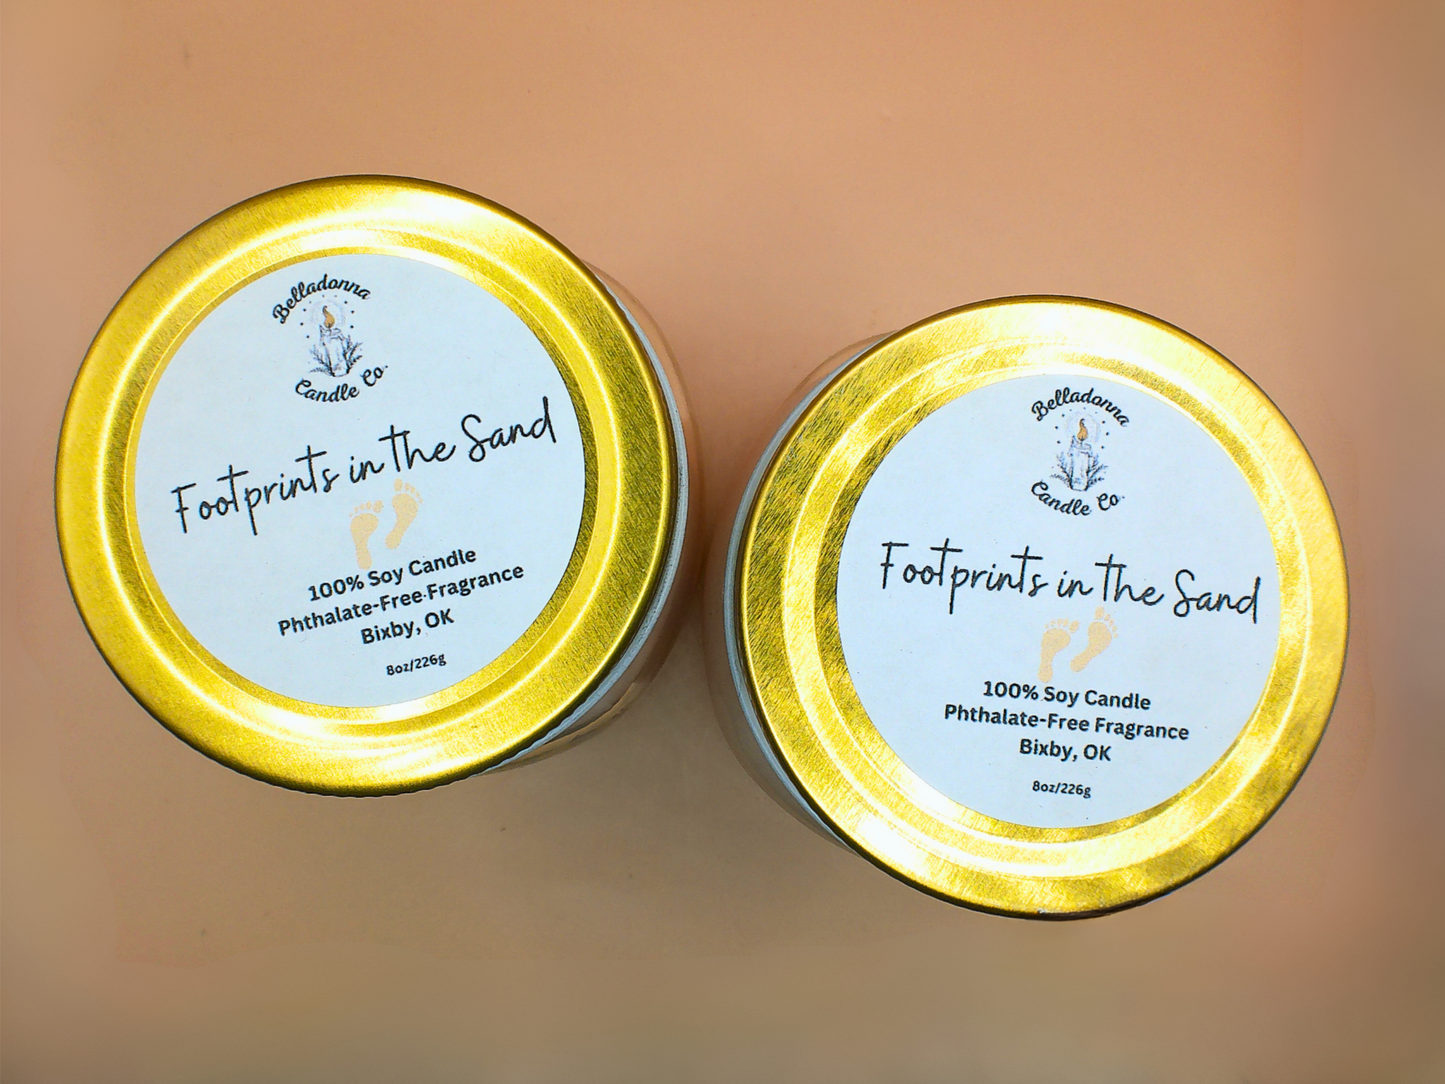 Footprints in the Sand Soy Candle